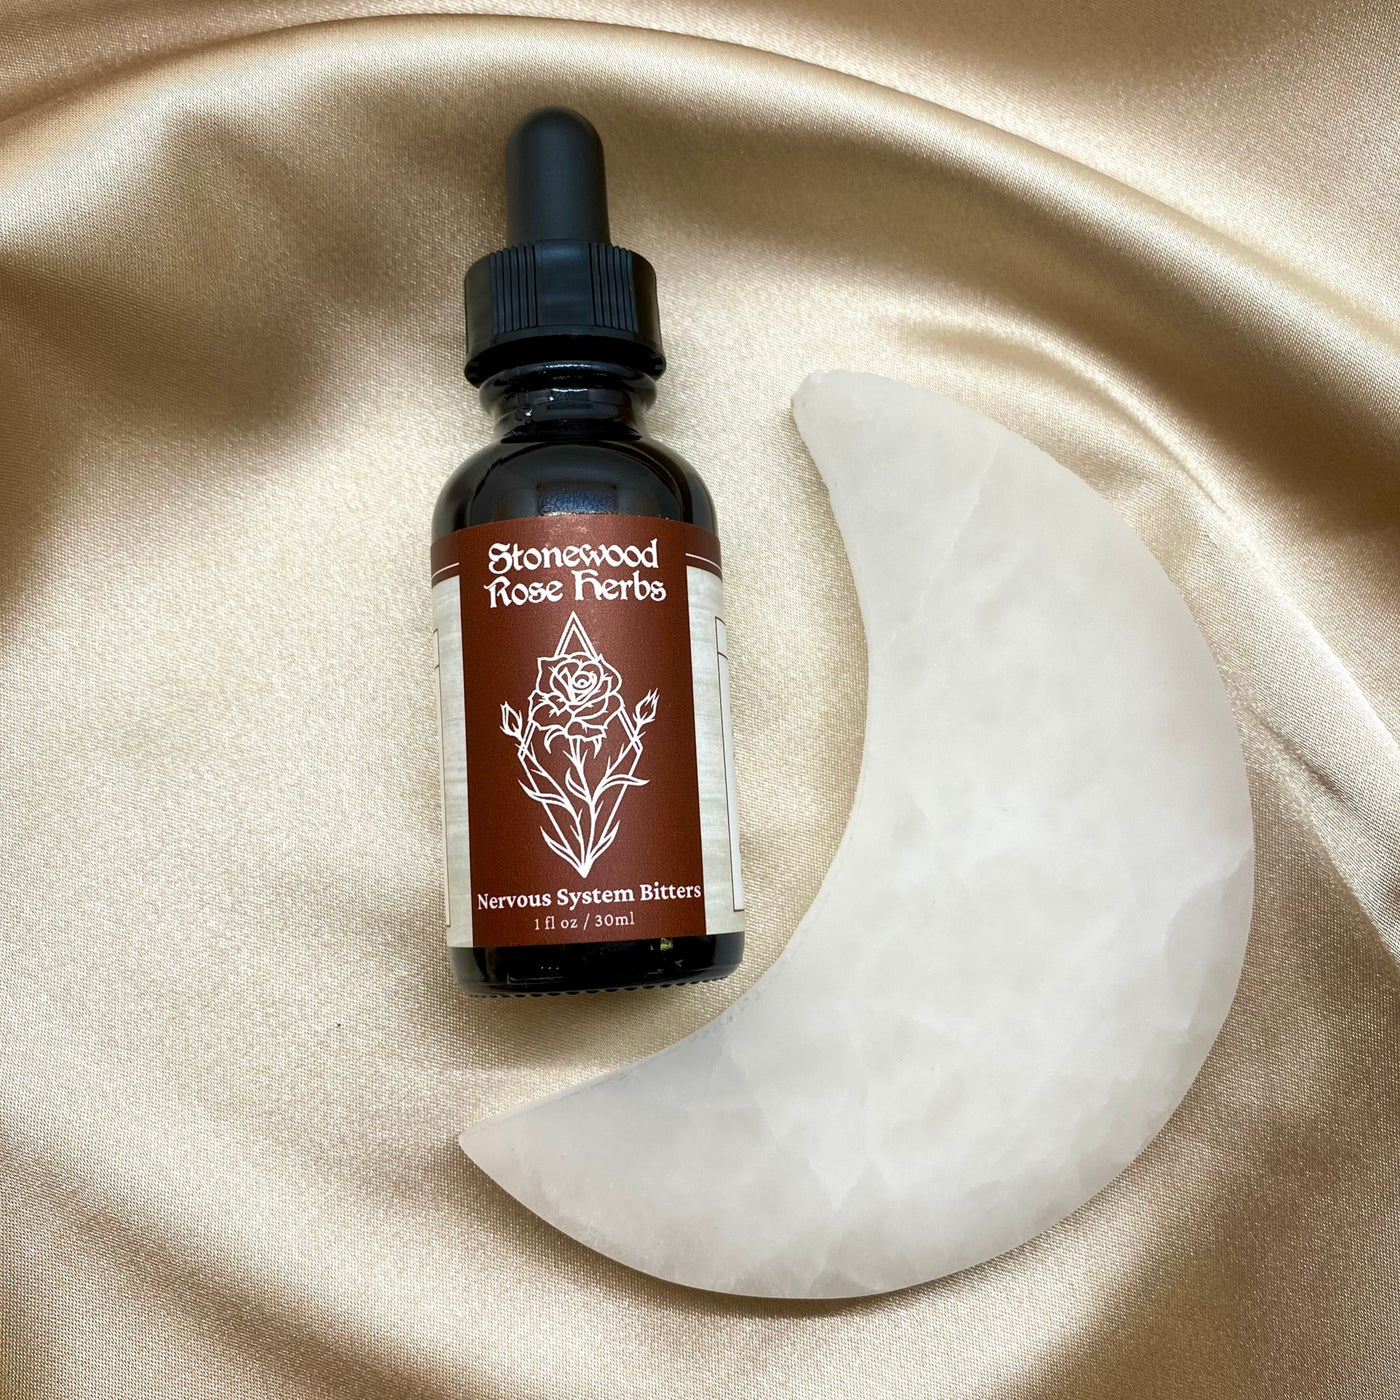 Nervous System Bitters | Stonewood Rose Herbs